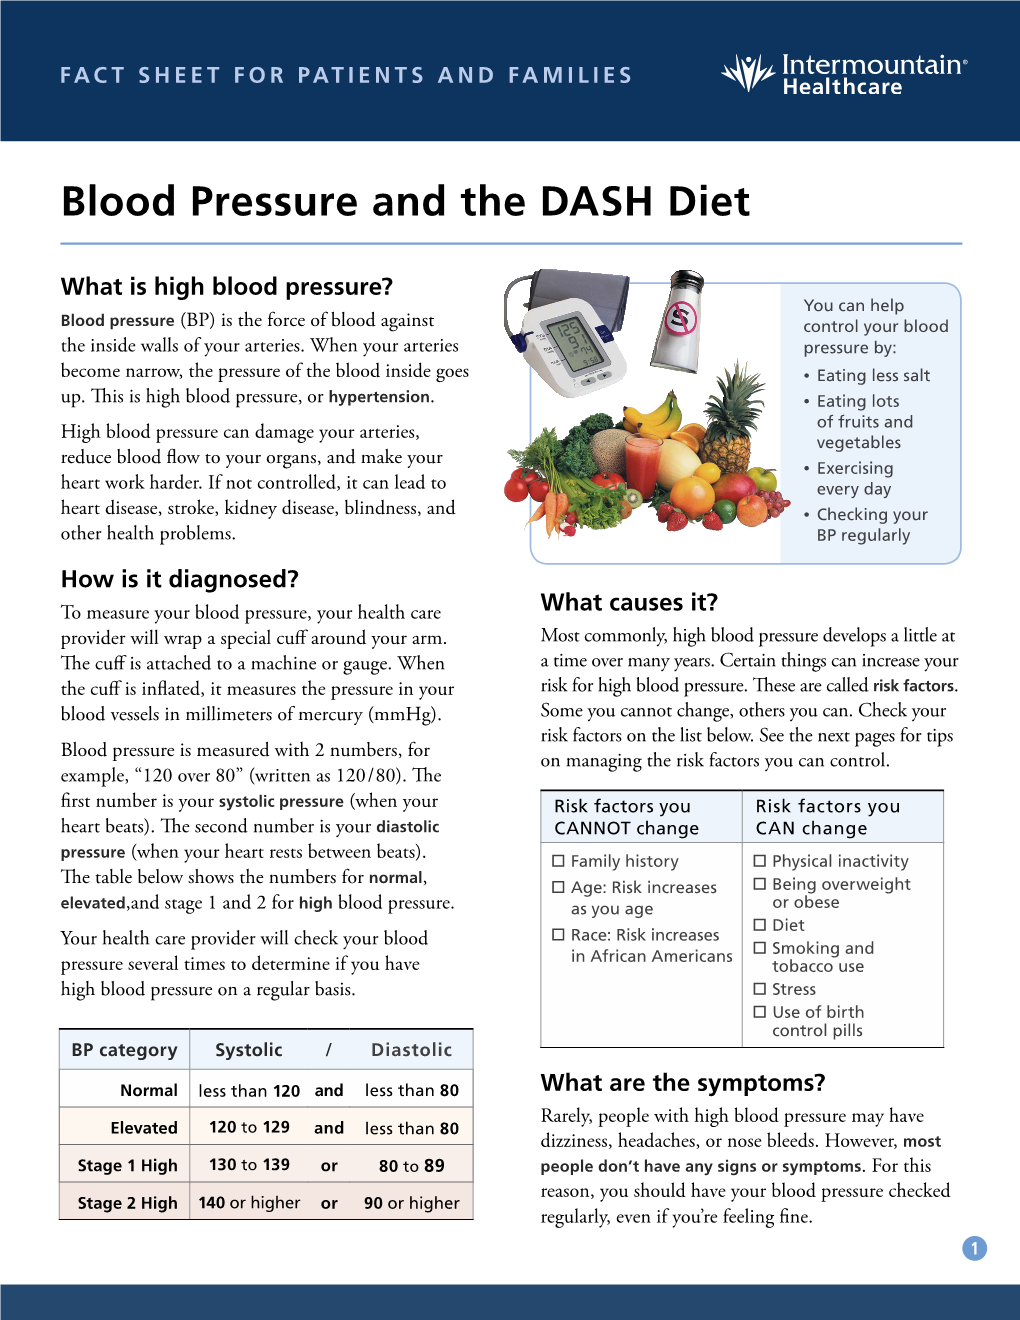 Blood Pressure and the DASH Diet